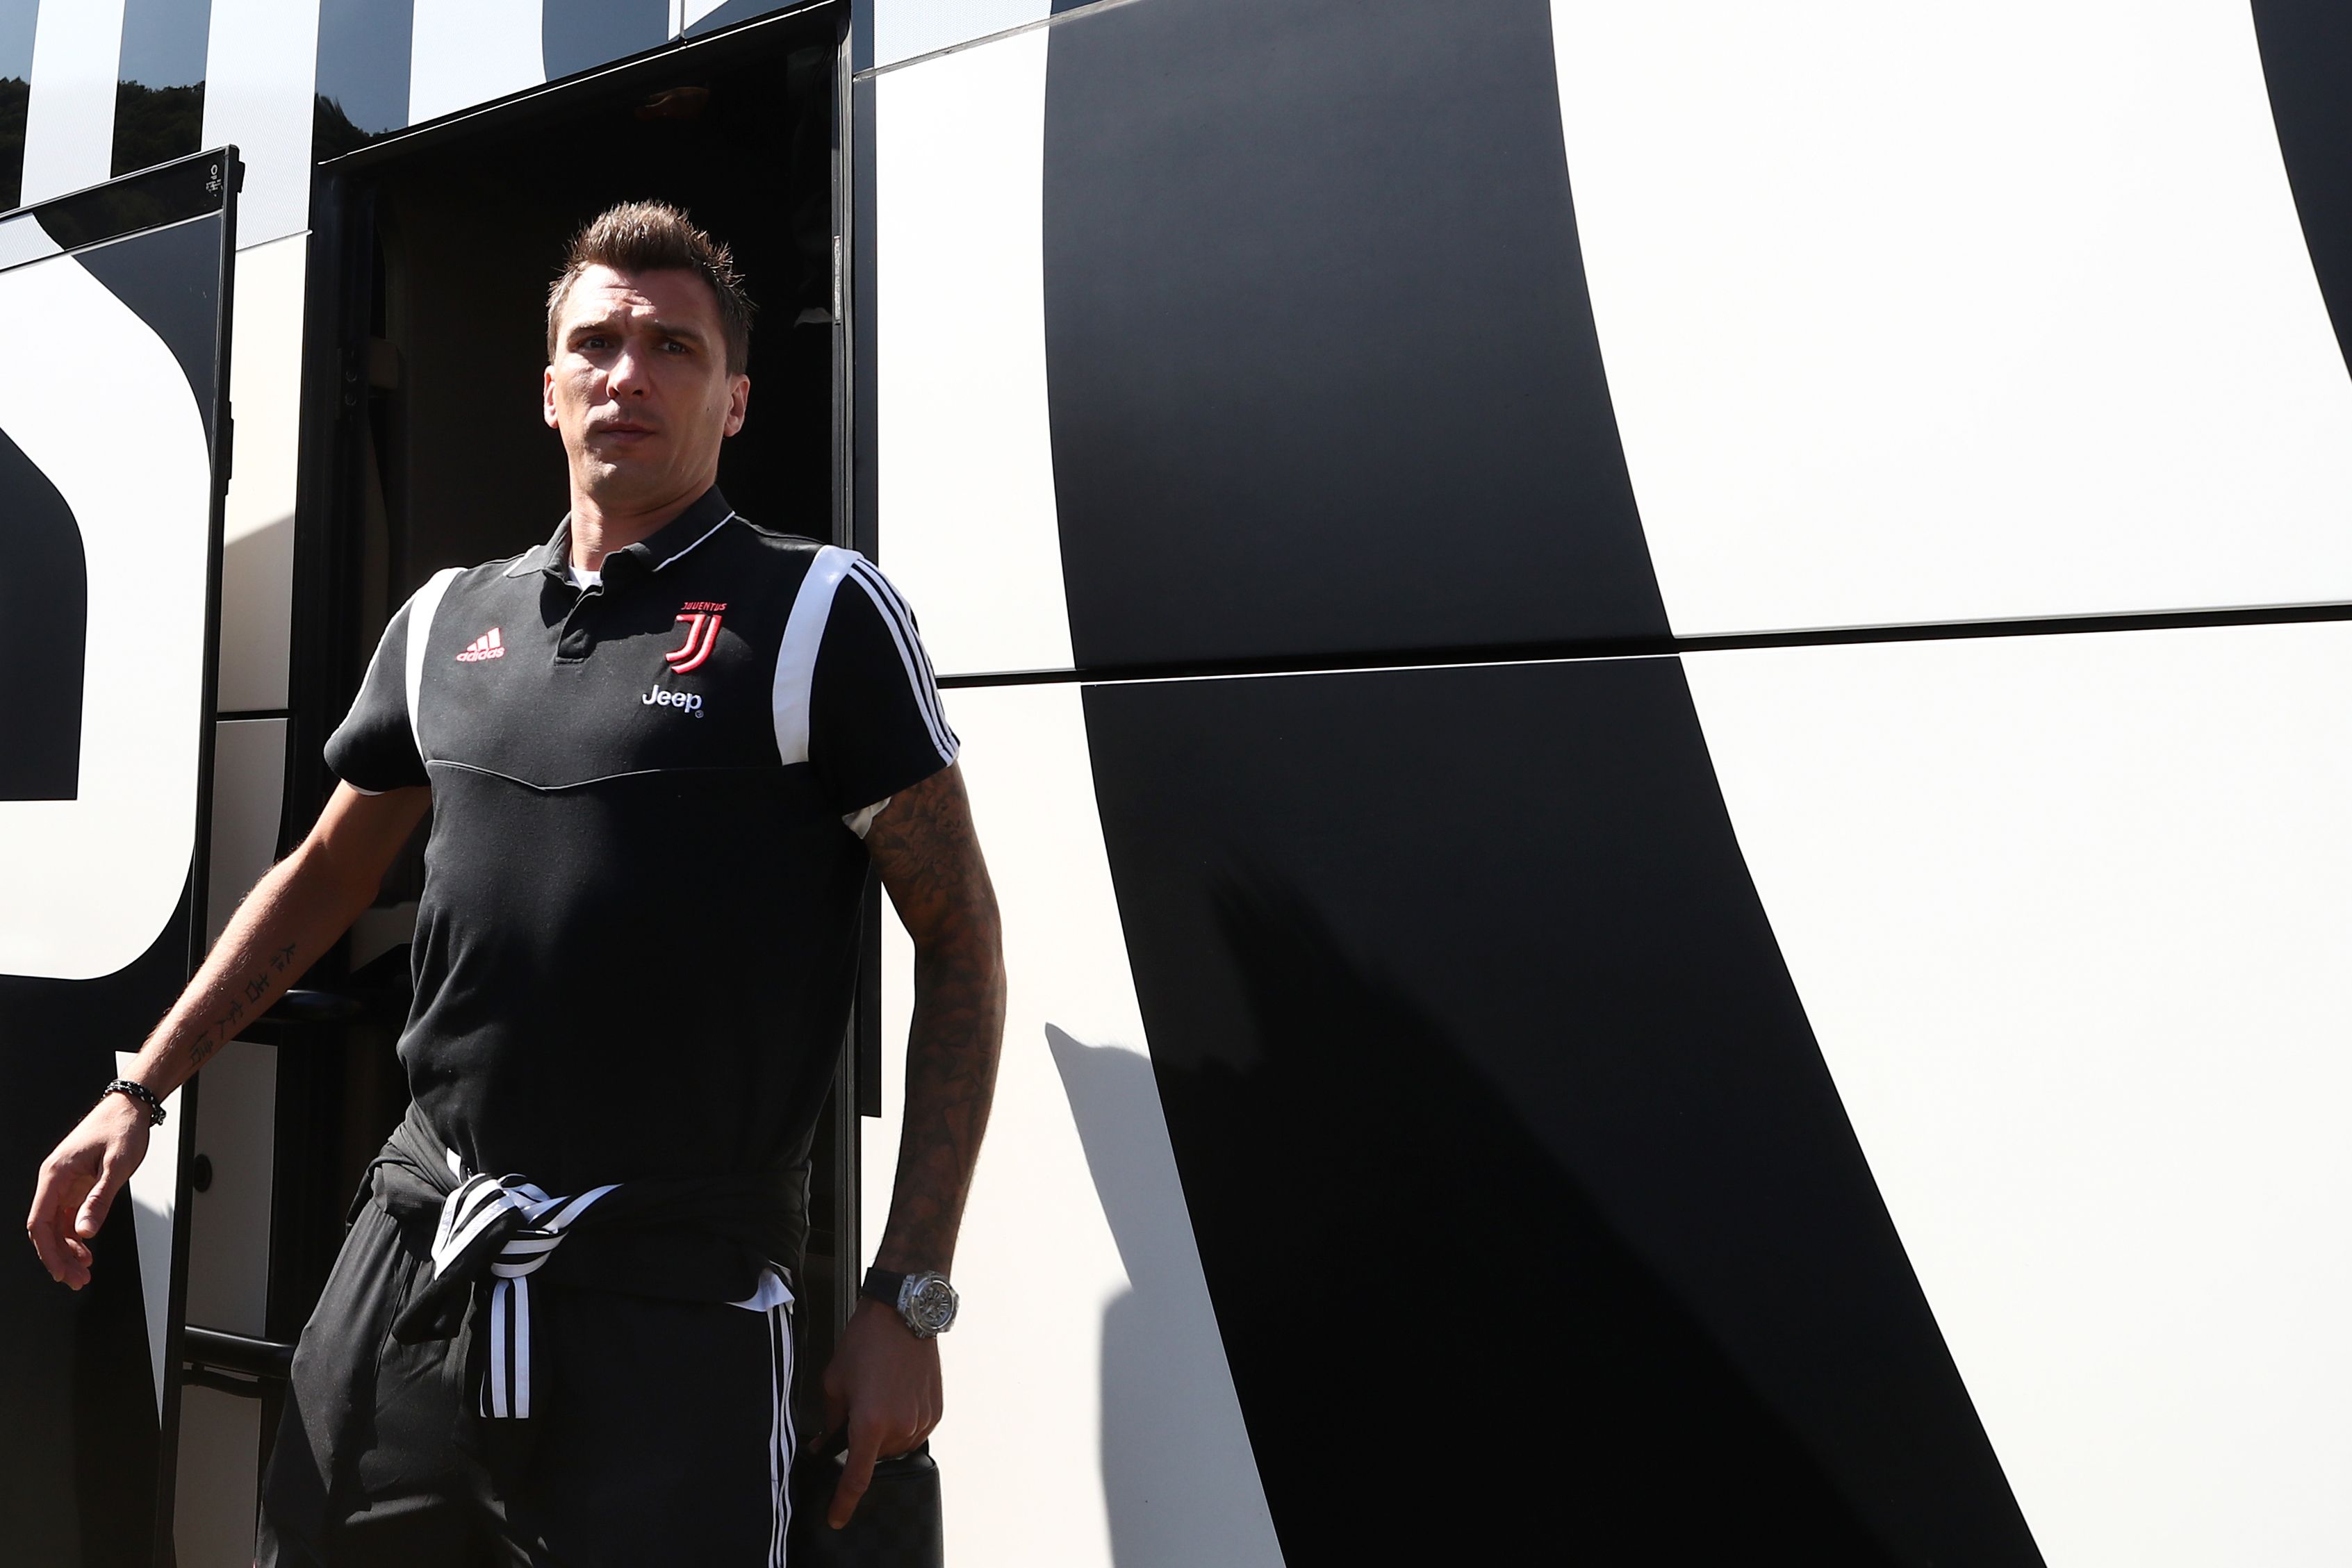 Juventus' Croatian forward Mario Mandzukic arrives for the friendly football match between Juventus A and Juventus B in Villar Perosa, on August 14, 2019. (Photo by Isabella BONOTTO / AFP)        (Photo credit should read ISABELLA BONOTTO/AFP/Getty Images)